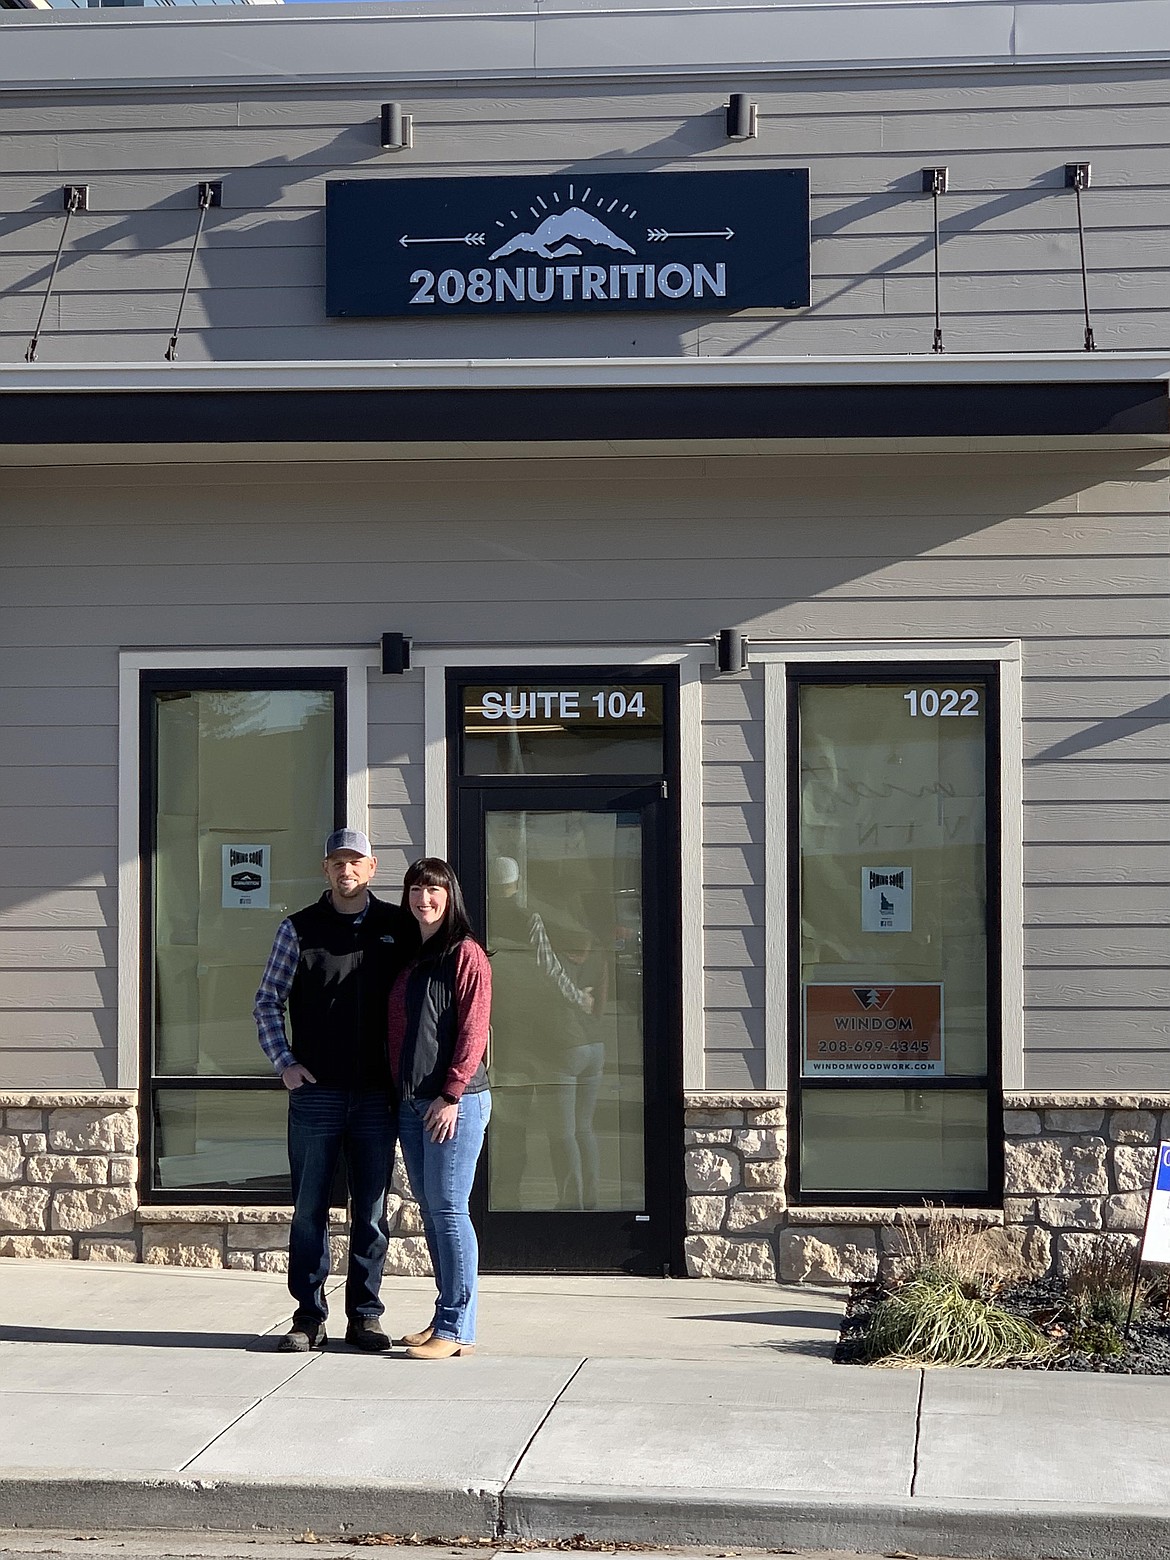 Courtesy photo
Travis and Karin Smith of 208Nutrition and 208Massage will open their business on Wednesday in Suite 104 at 1022 N. Fourth St.